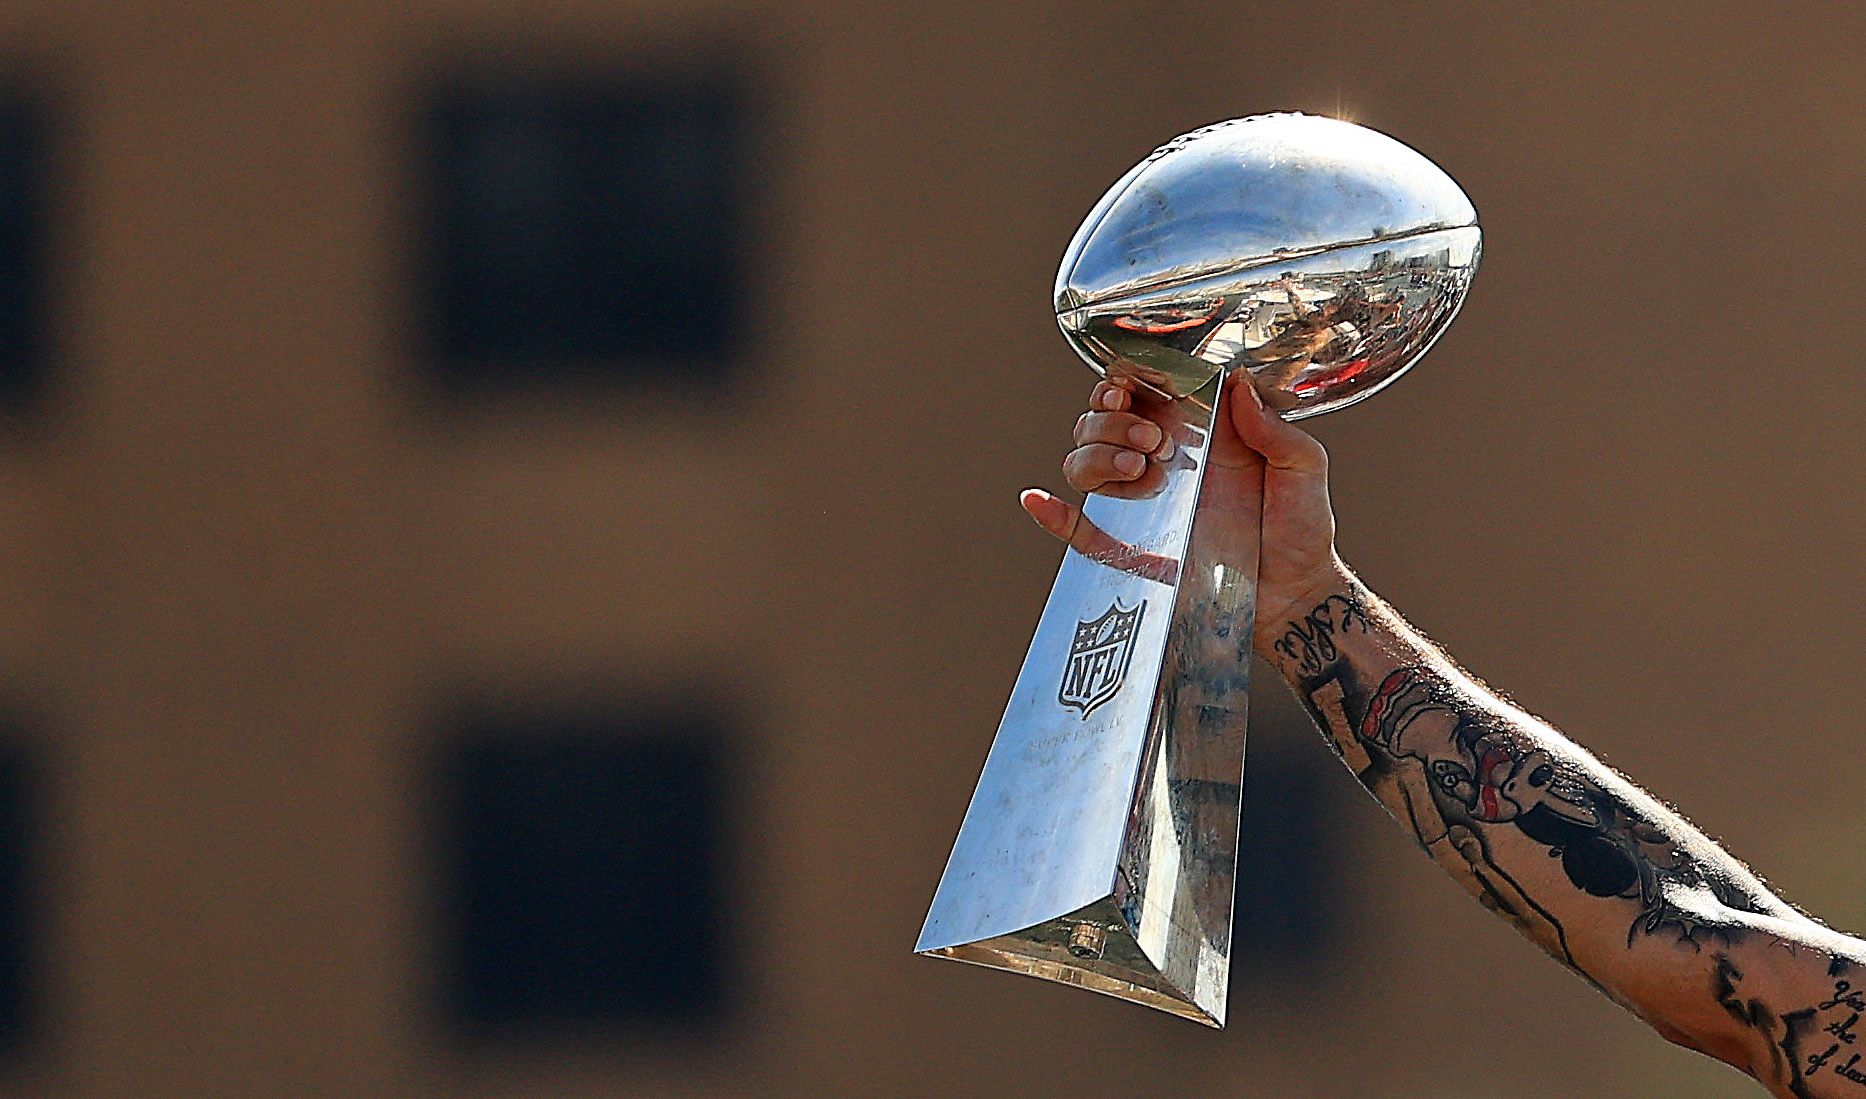 Mike Evans #13 of the Tampa Bay Buccaneers celebrates their Super Bowl LV victory with the Vince Lombardi trophy during a boat parade through the city on February 10, 2021 in Tampa, Florida.